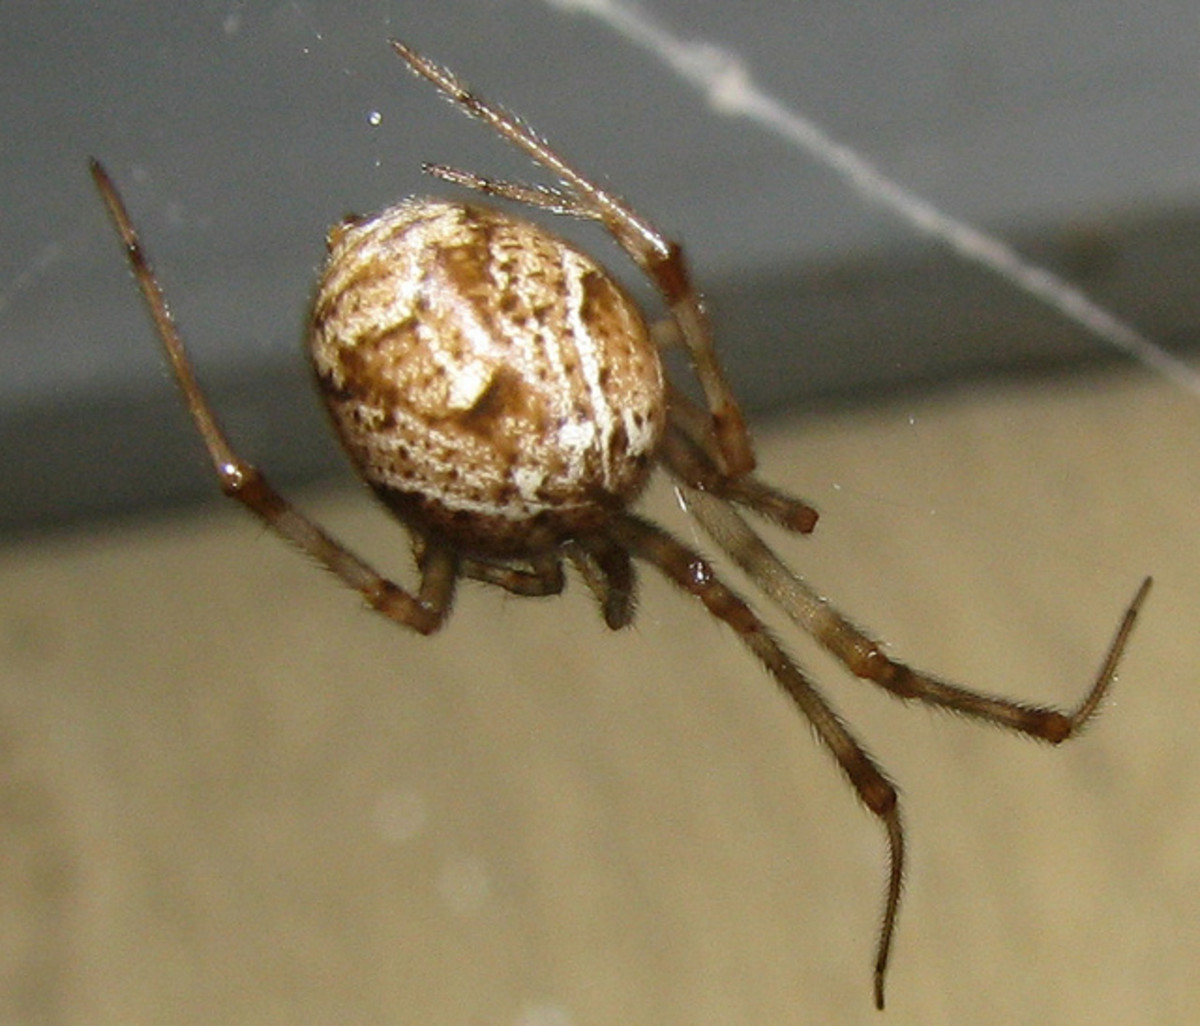 But common house spiders actually look more like mottled bird eggs than a black widow.